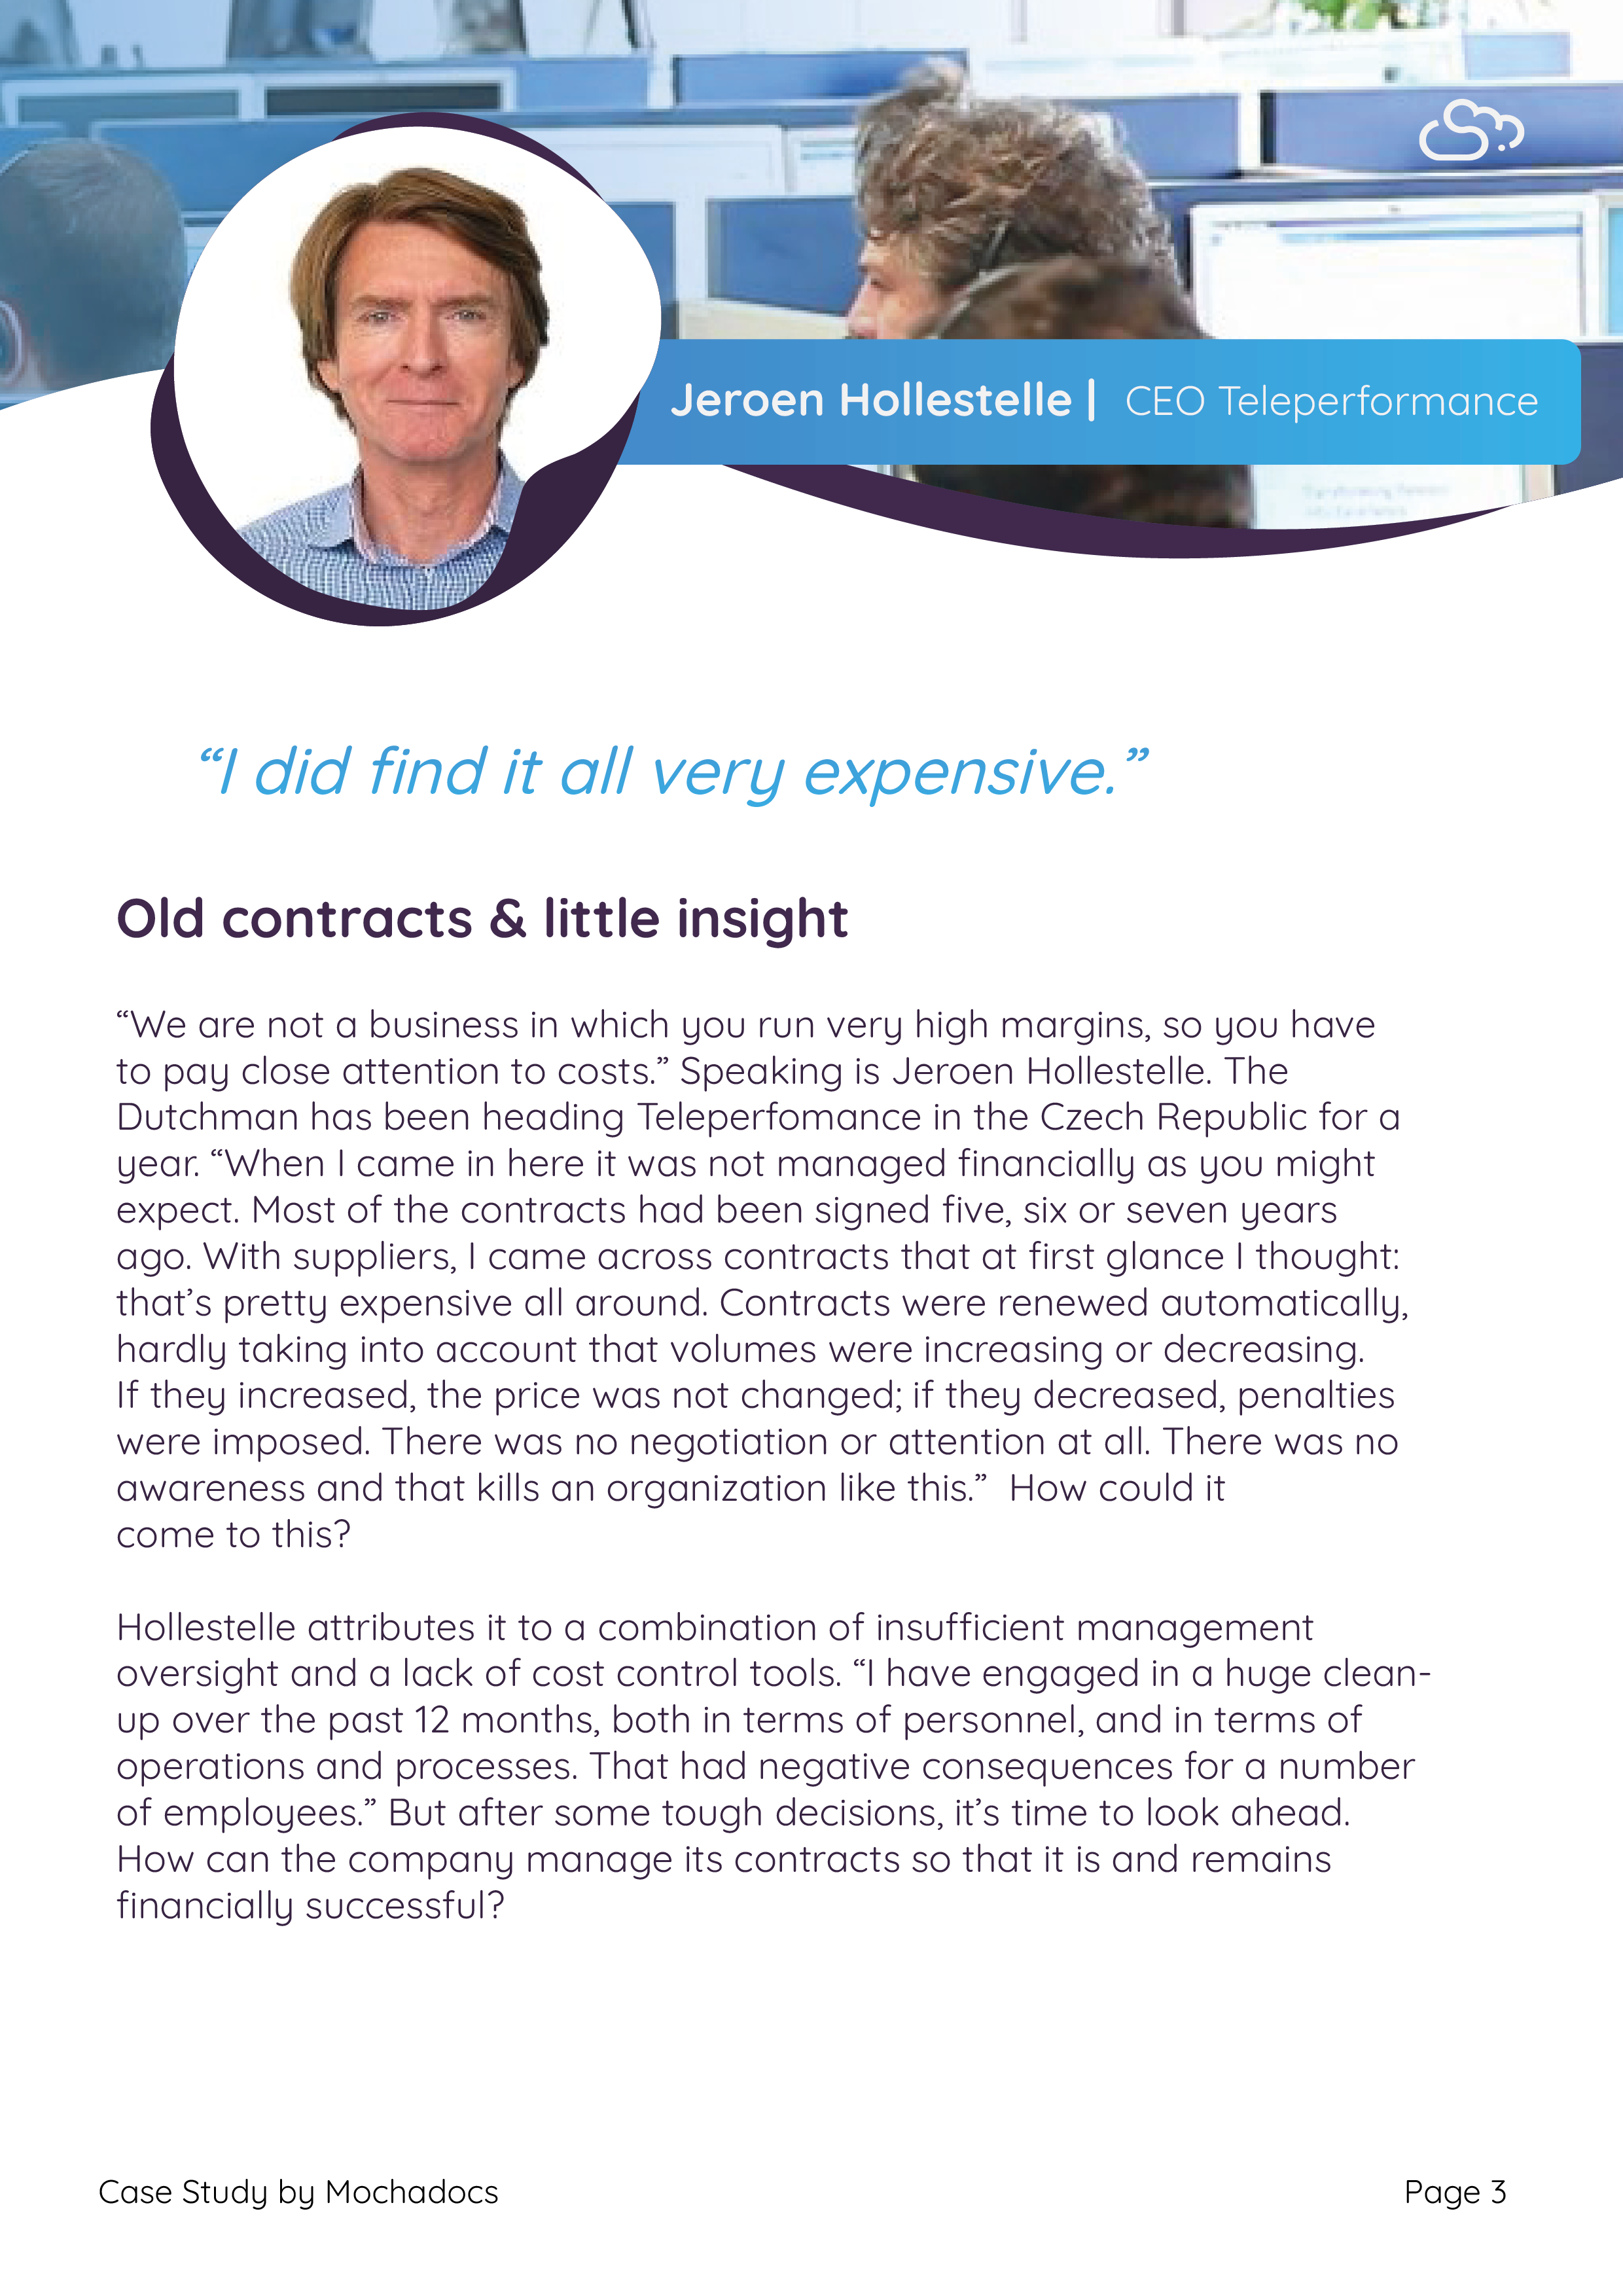 Mochadocs - Contract Management - Case Study - Teleperformance - Page 3